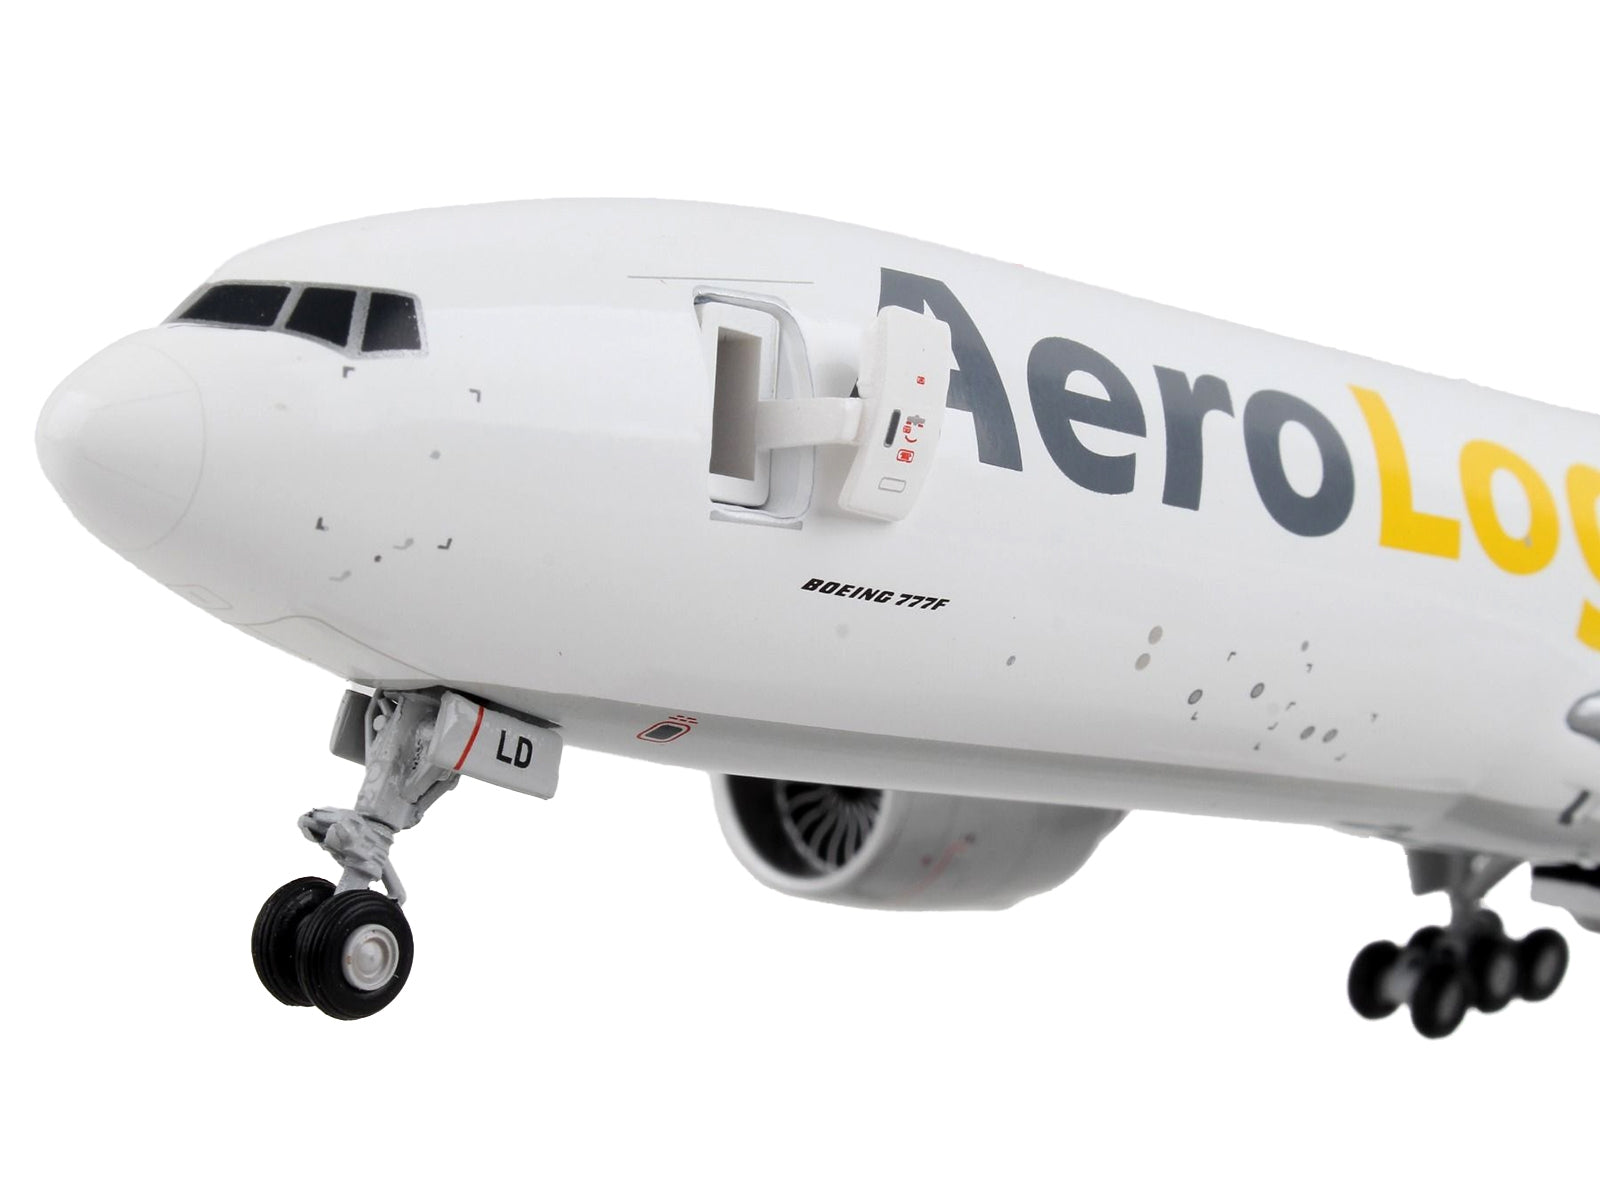 Boeing 777F Commercial Aircraft "AeroLogic" White "Gemini 200 - Interactive" Series 1/200 Diecast Model Airplane by GeminiJets